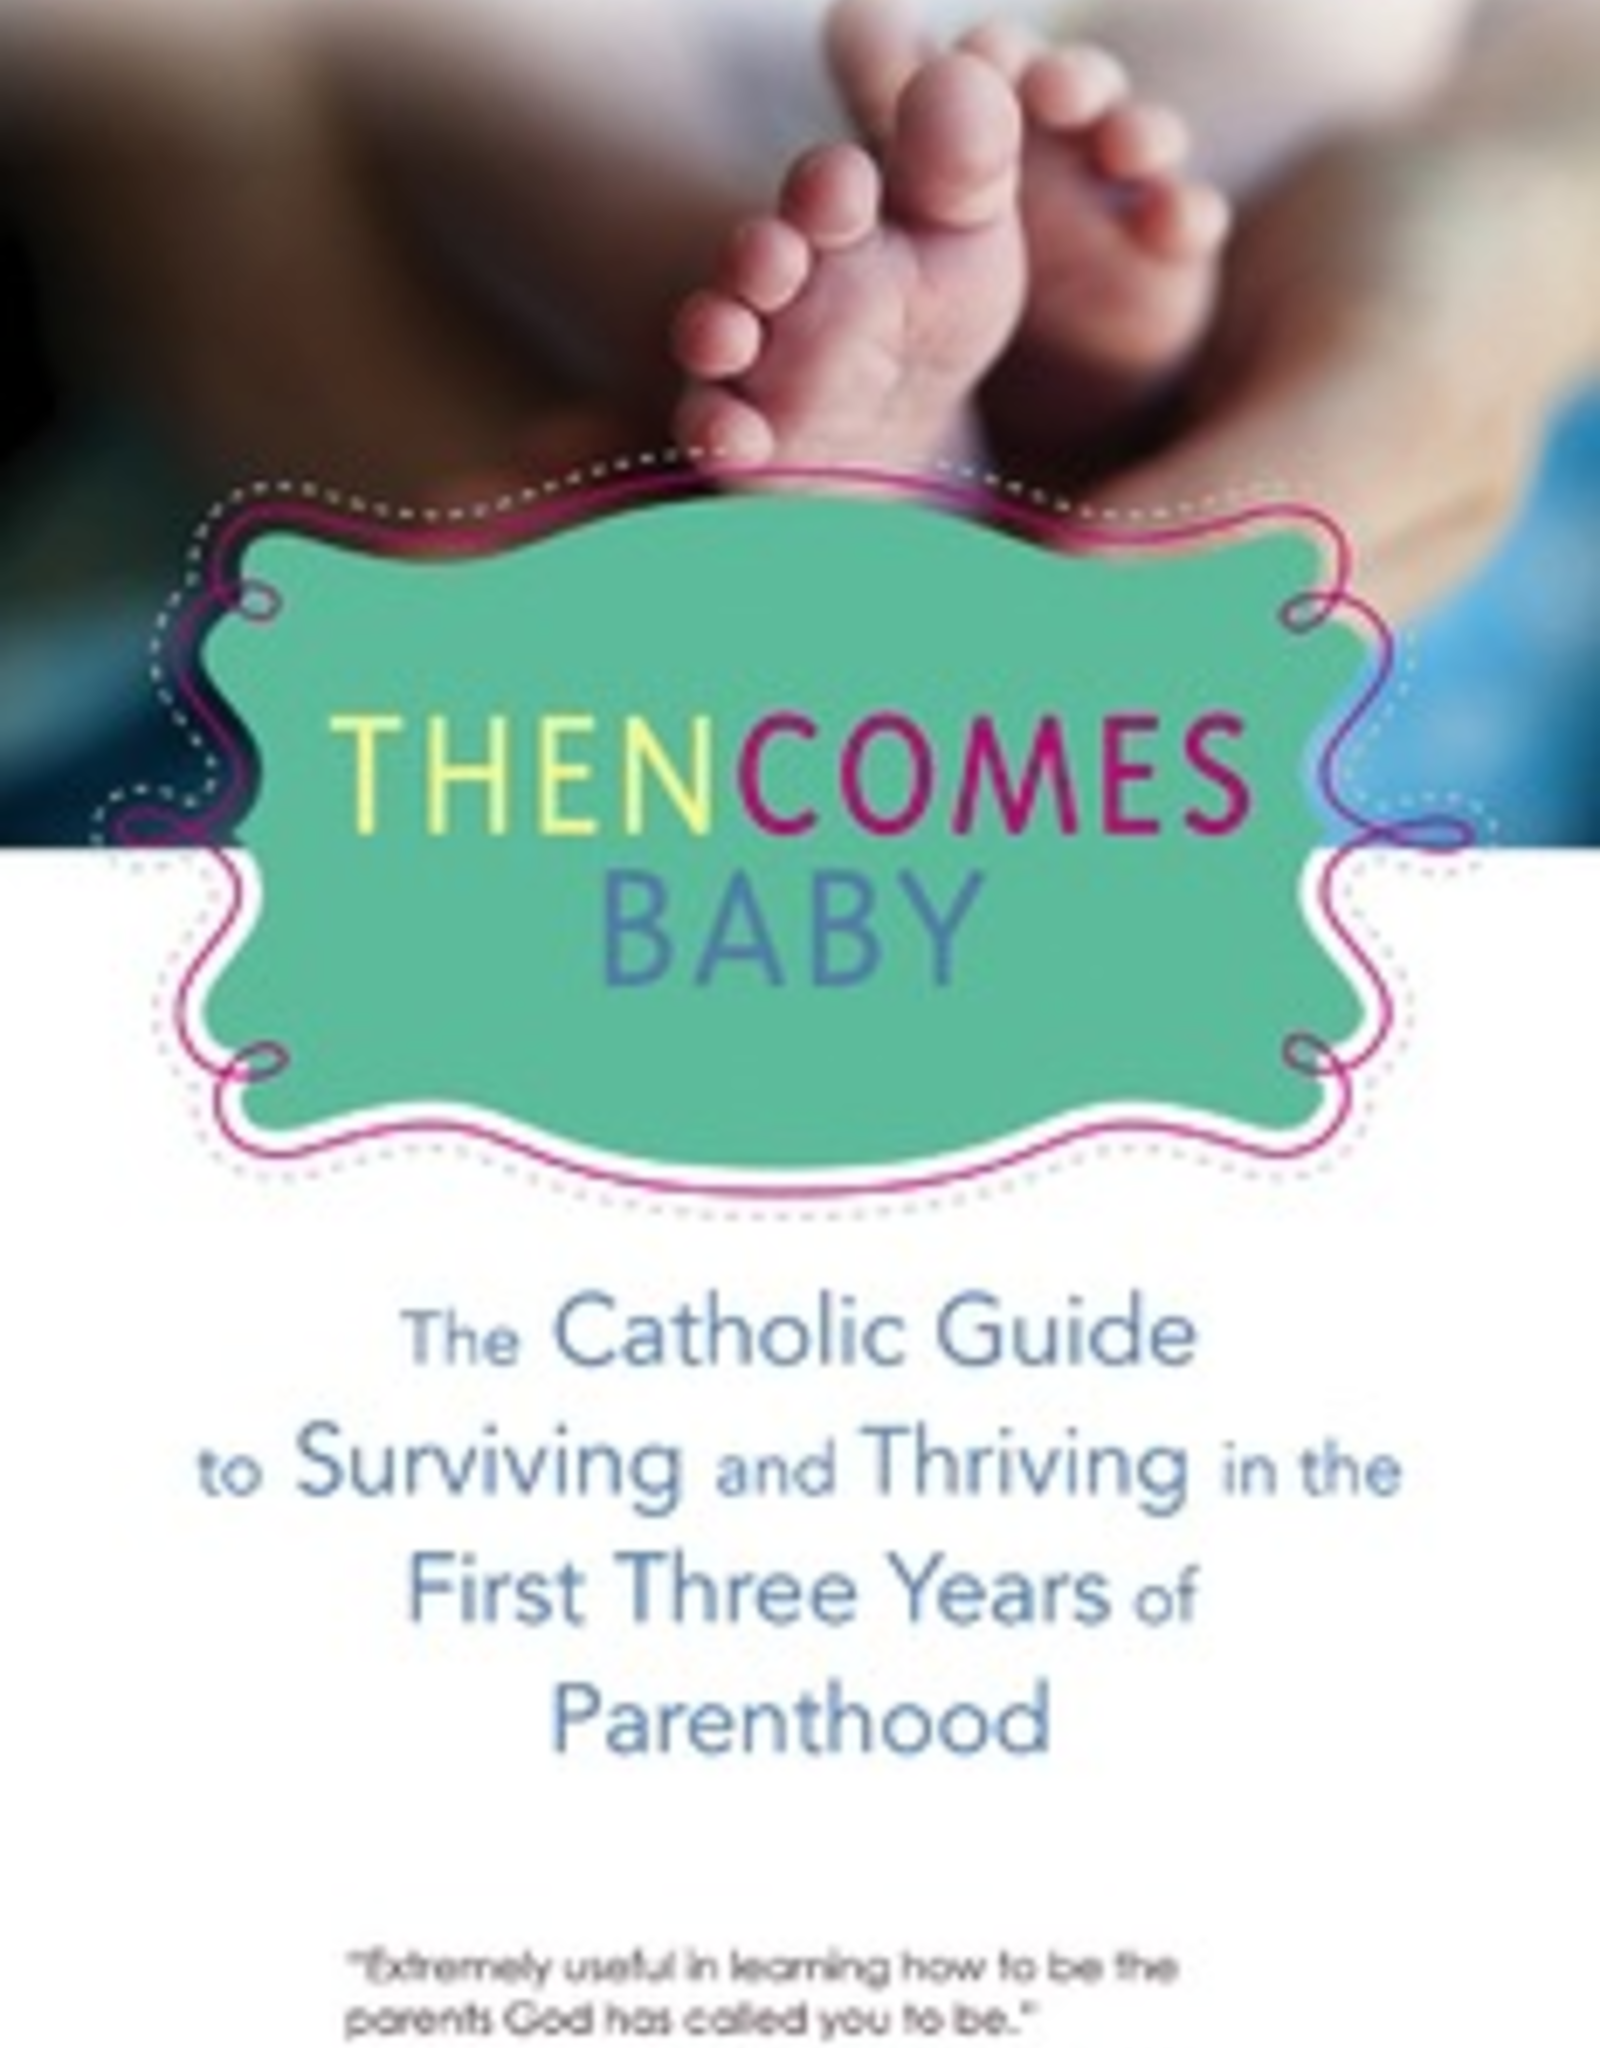 Ave Maria Press Then Comes Baby:  The Catholic Guide to Surviving and Thriving in the First Three Years of Parenthood, by Gregory Popcak (paperback)